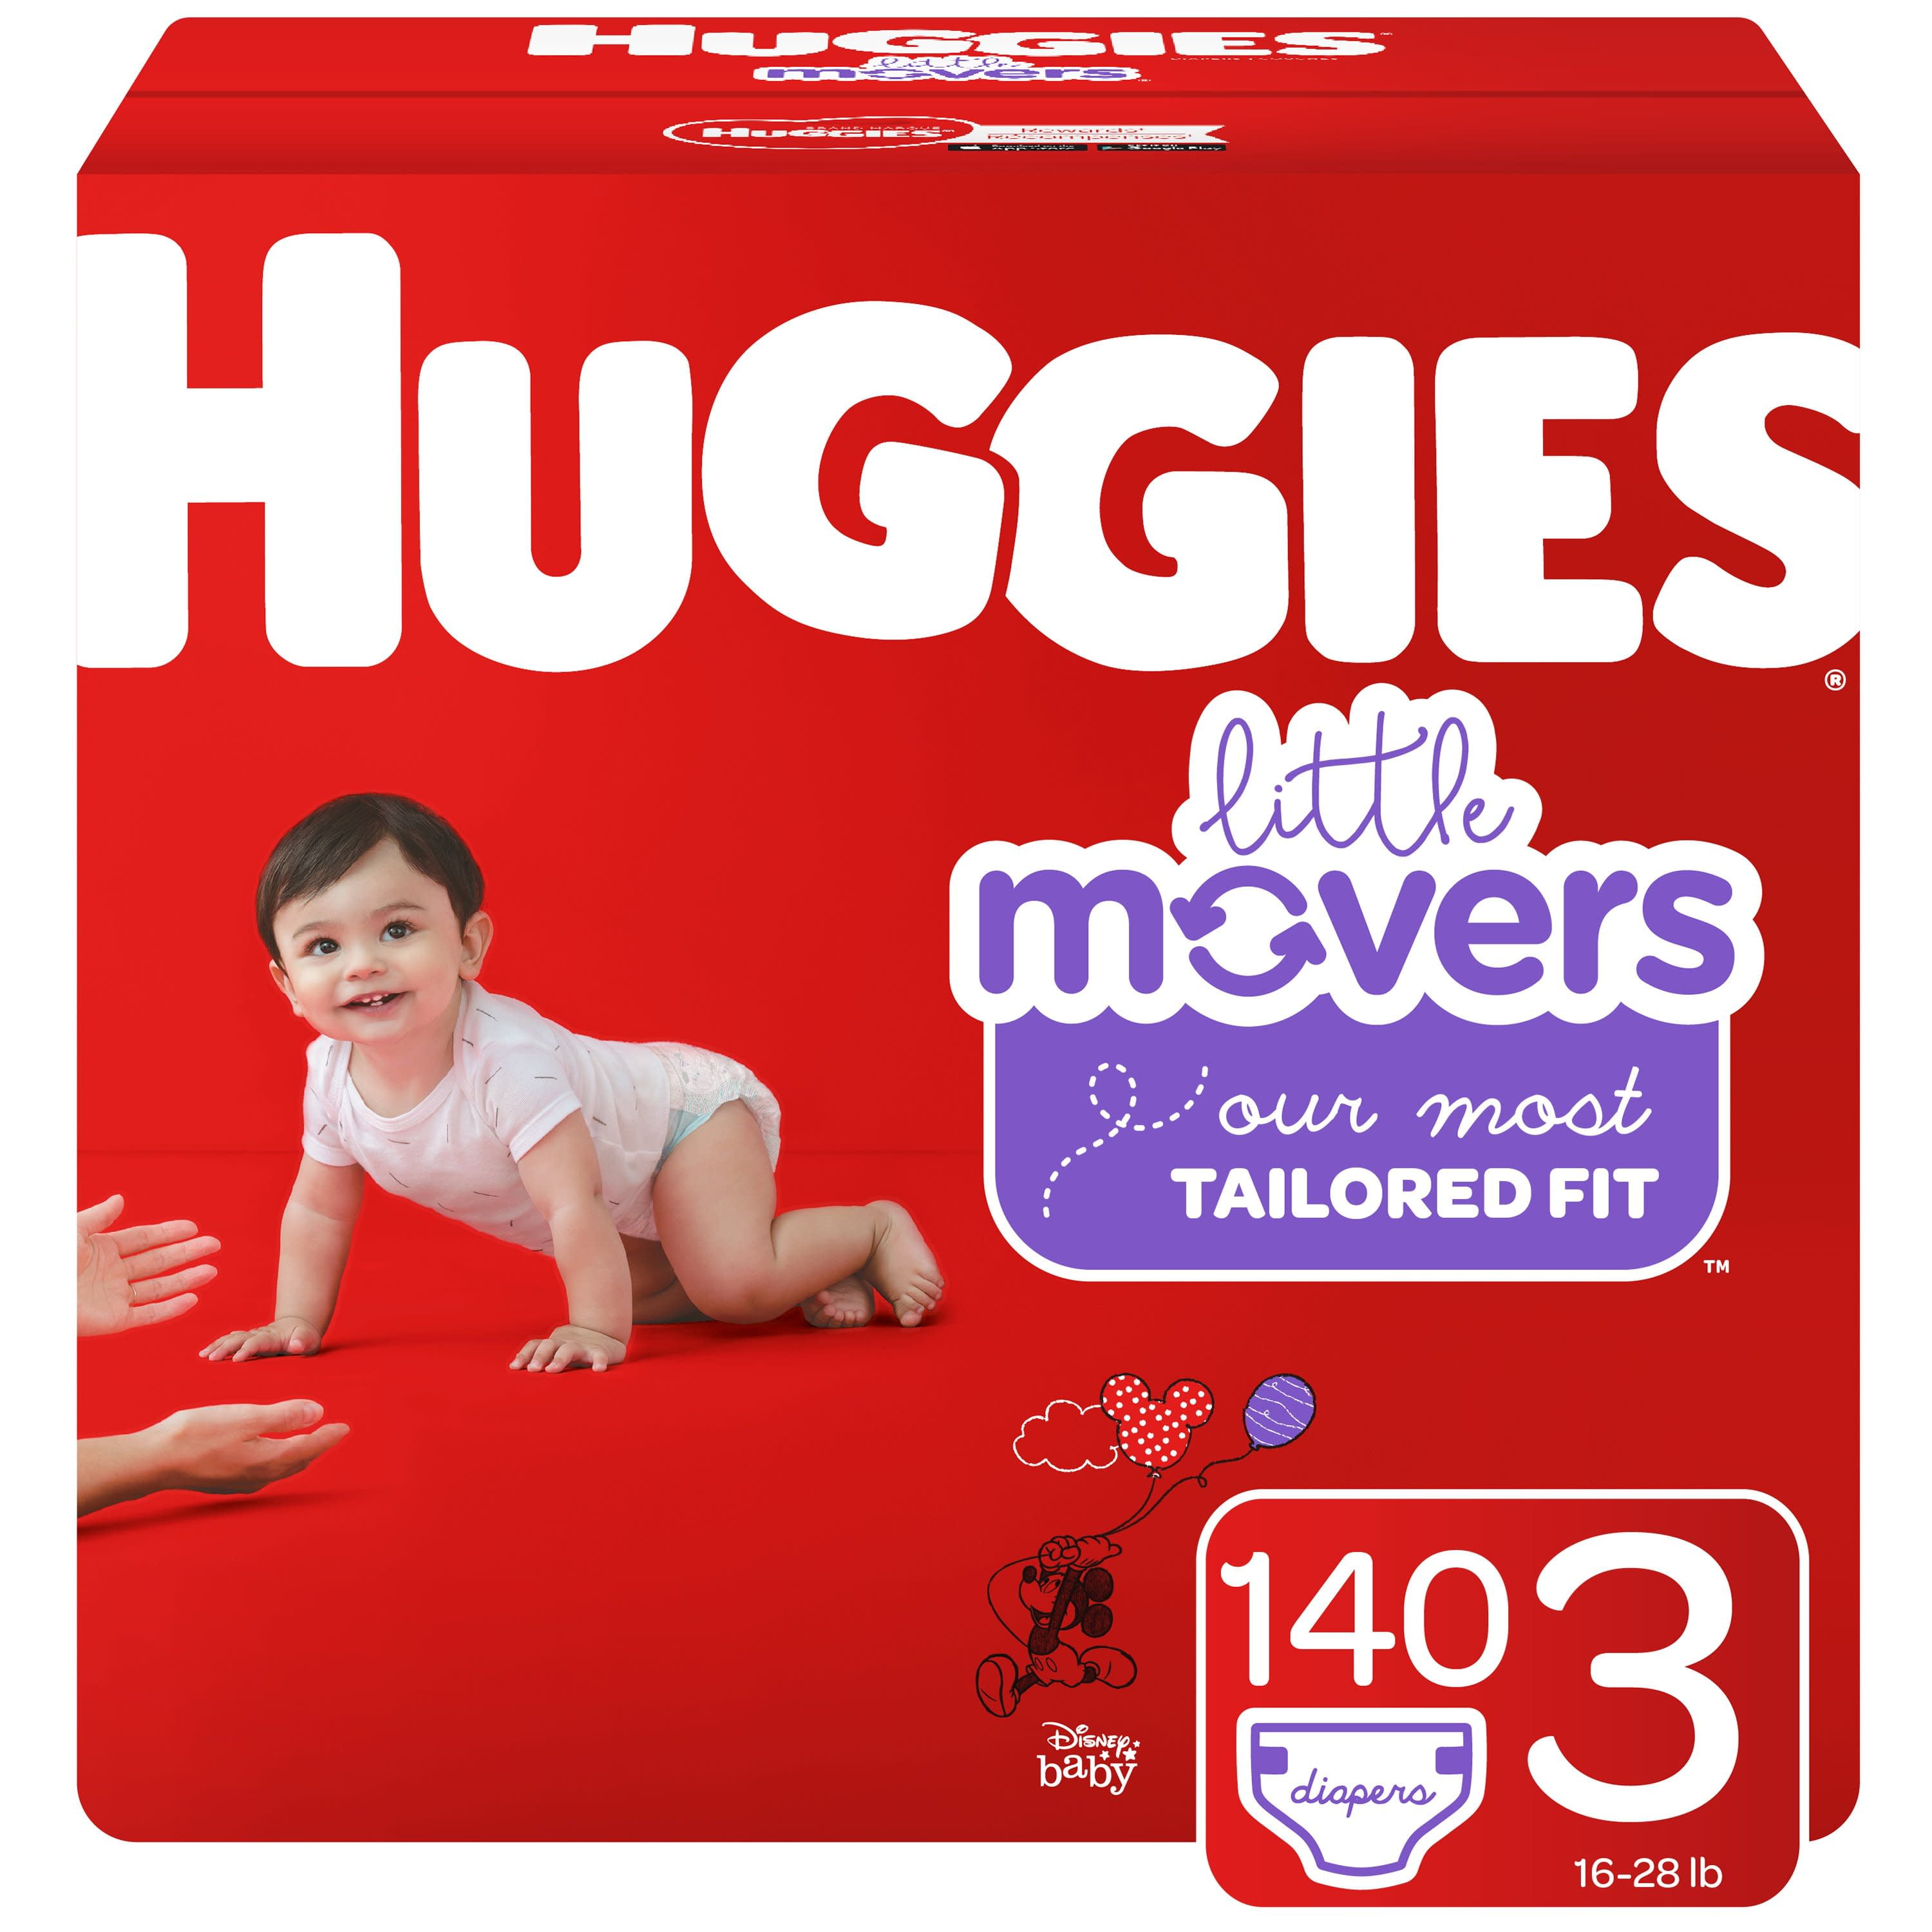 Huggies, Langes, Extra Care, Taille 3, 40 pc